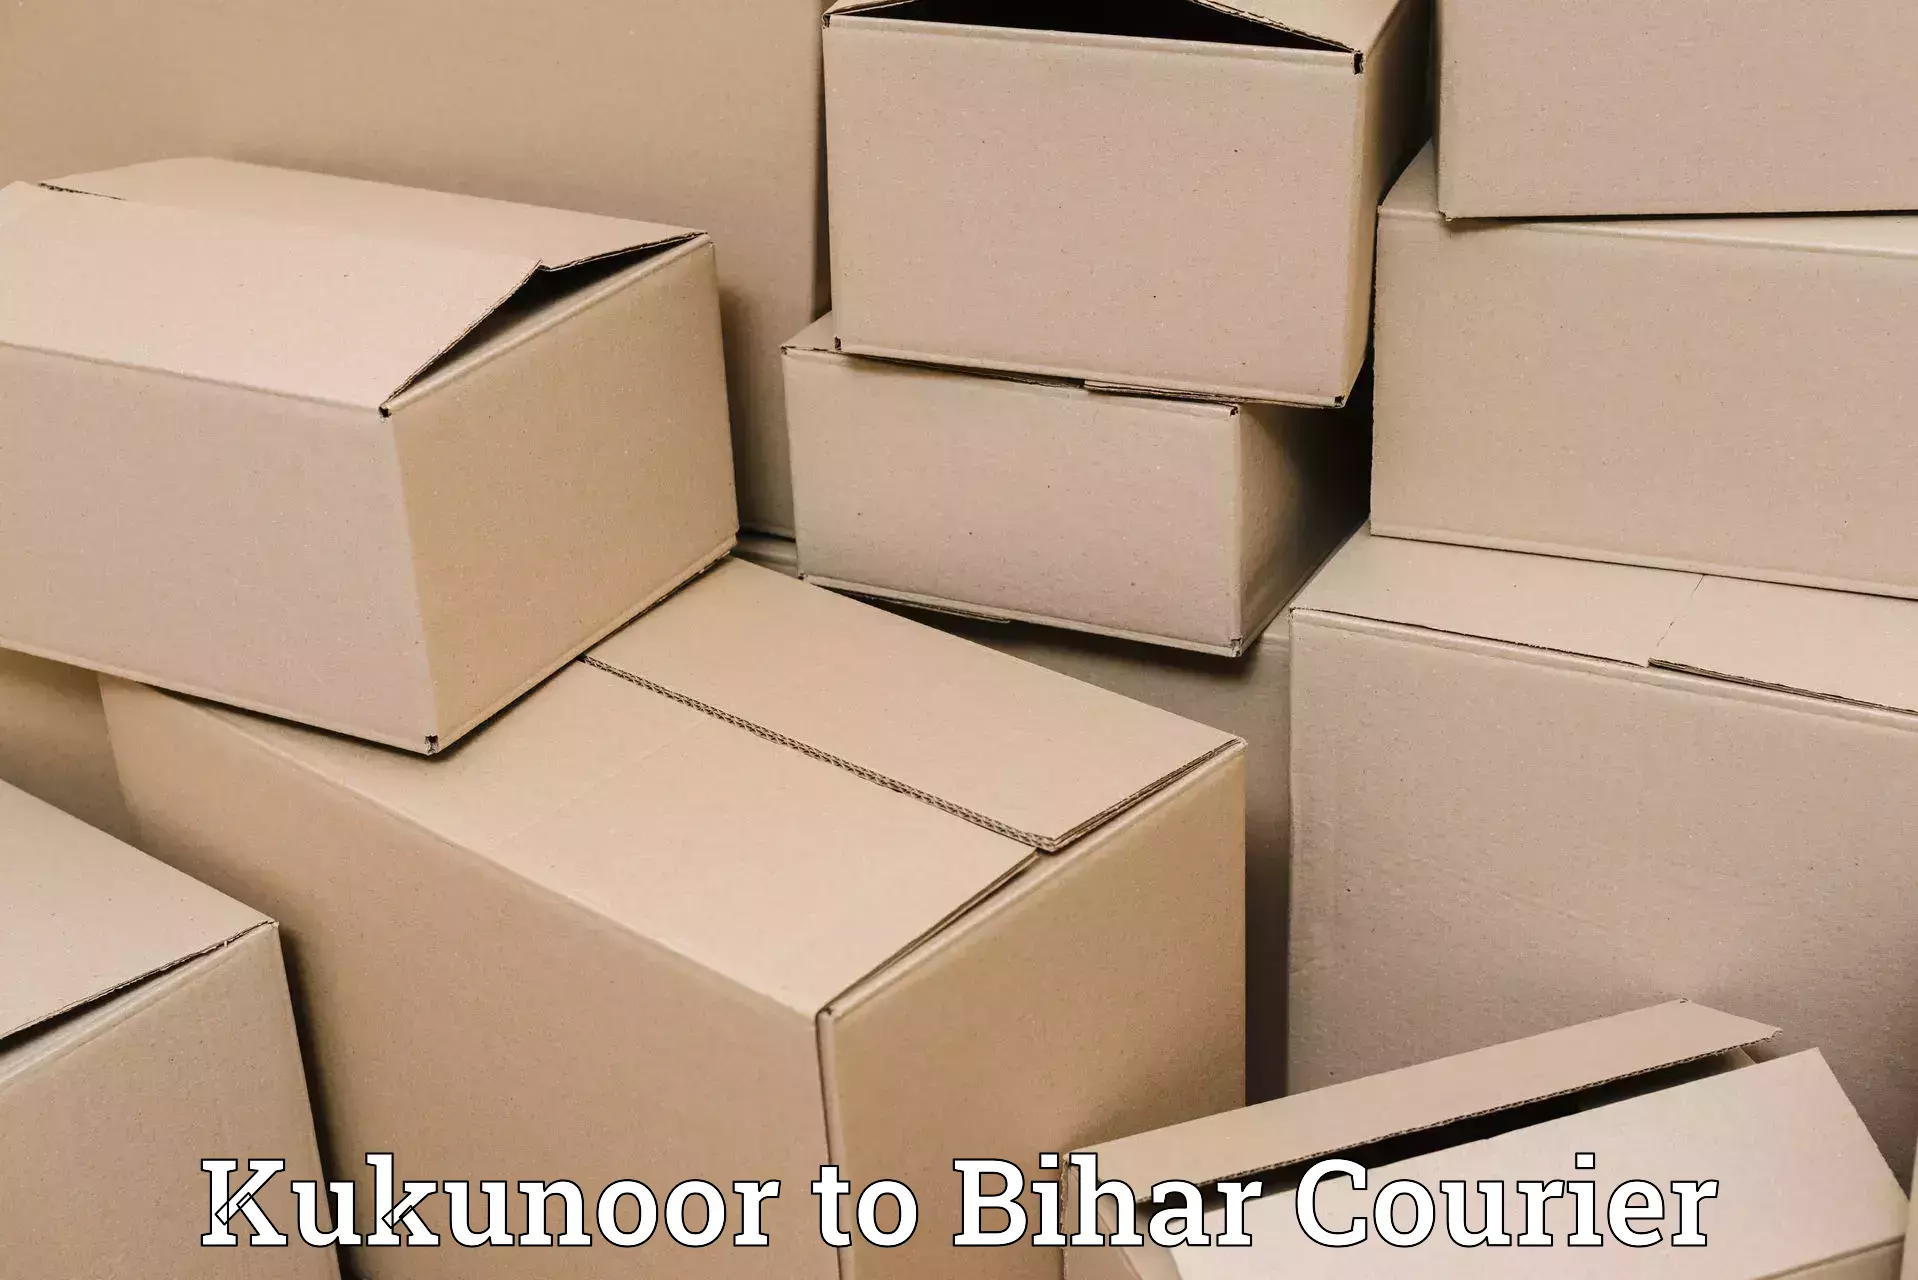 Courier service comparison Kukunoor to Kaluahi